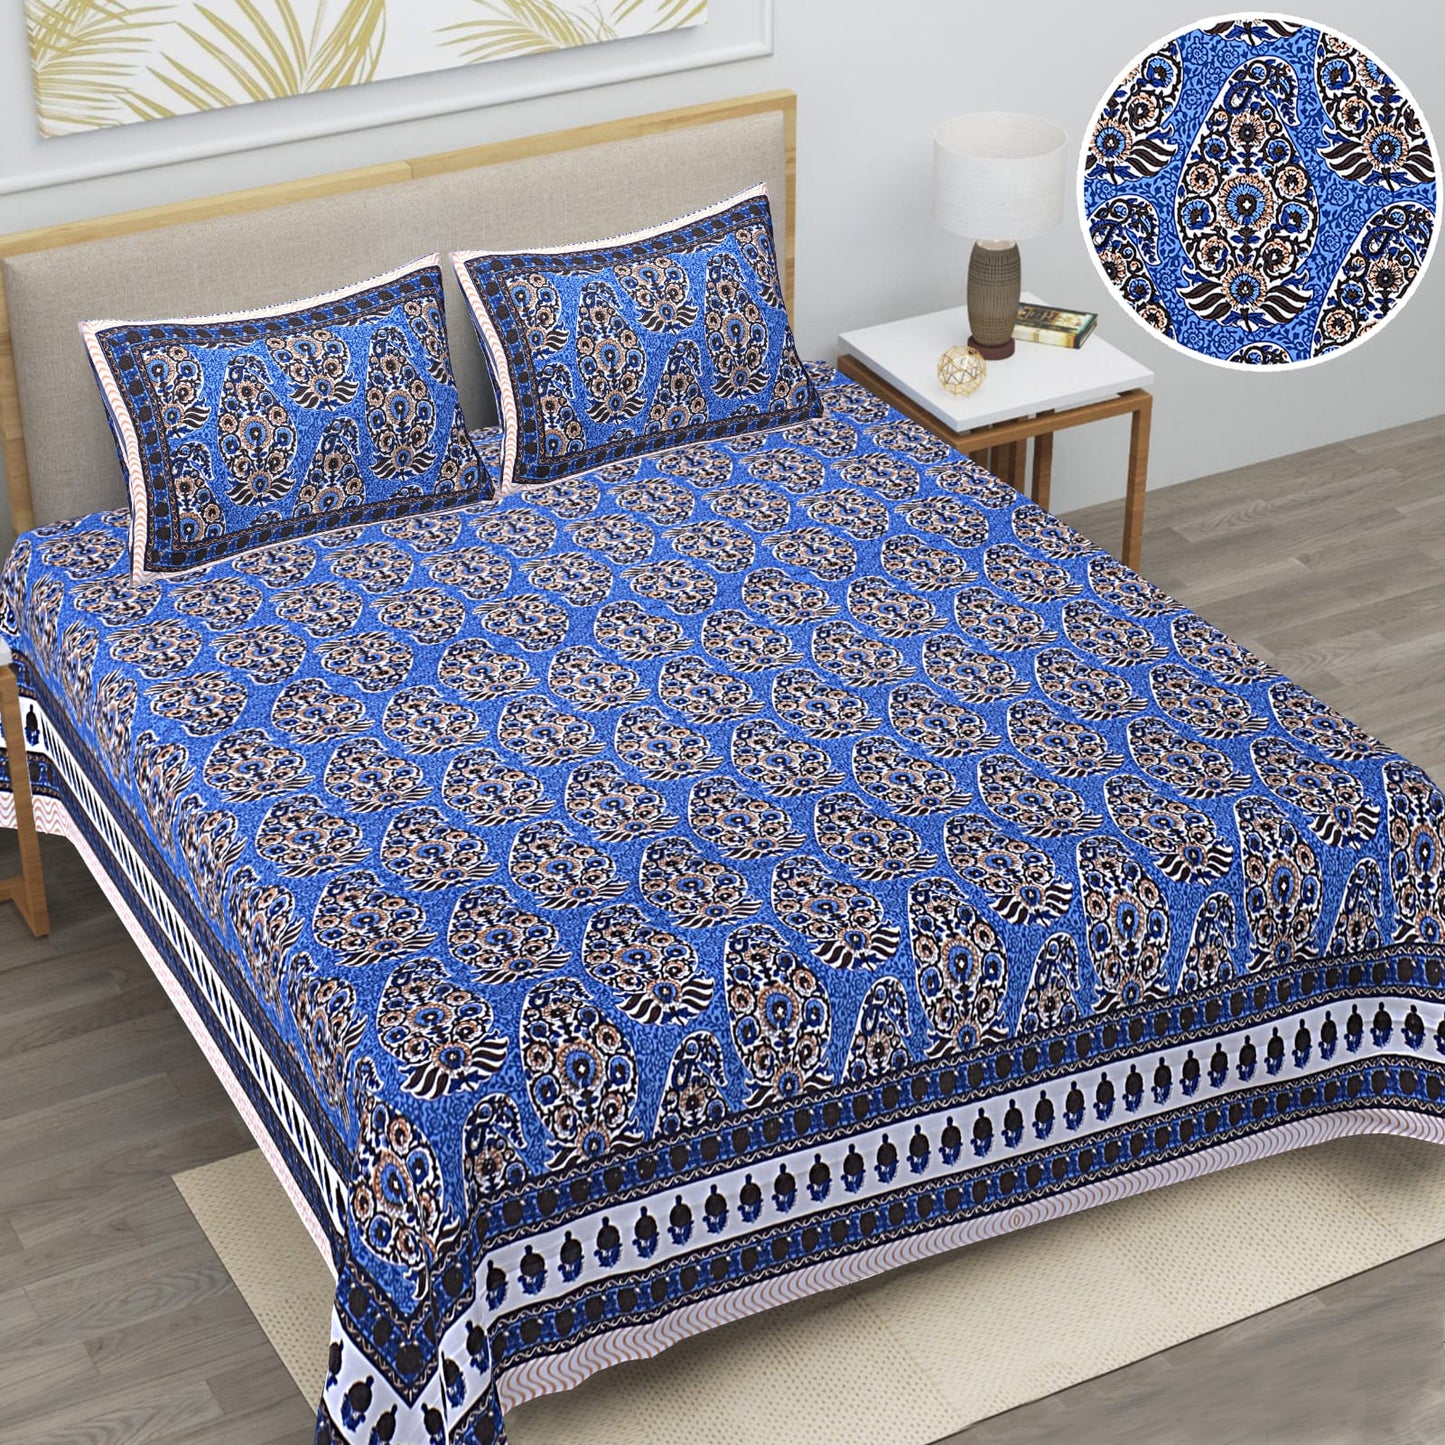 Regal Comfort: King Size Jaipuri Bedsheet Set with Two Chain Pillow Covers